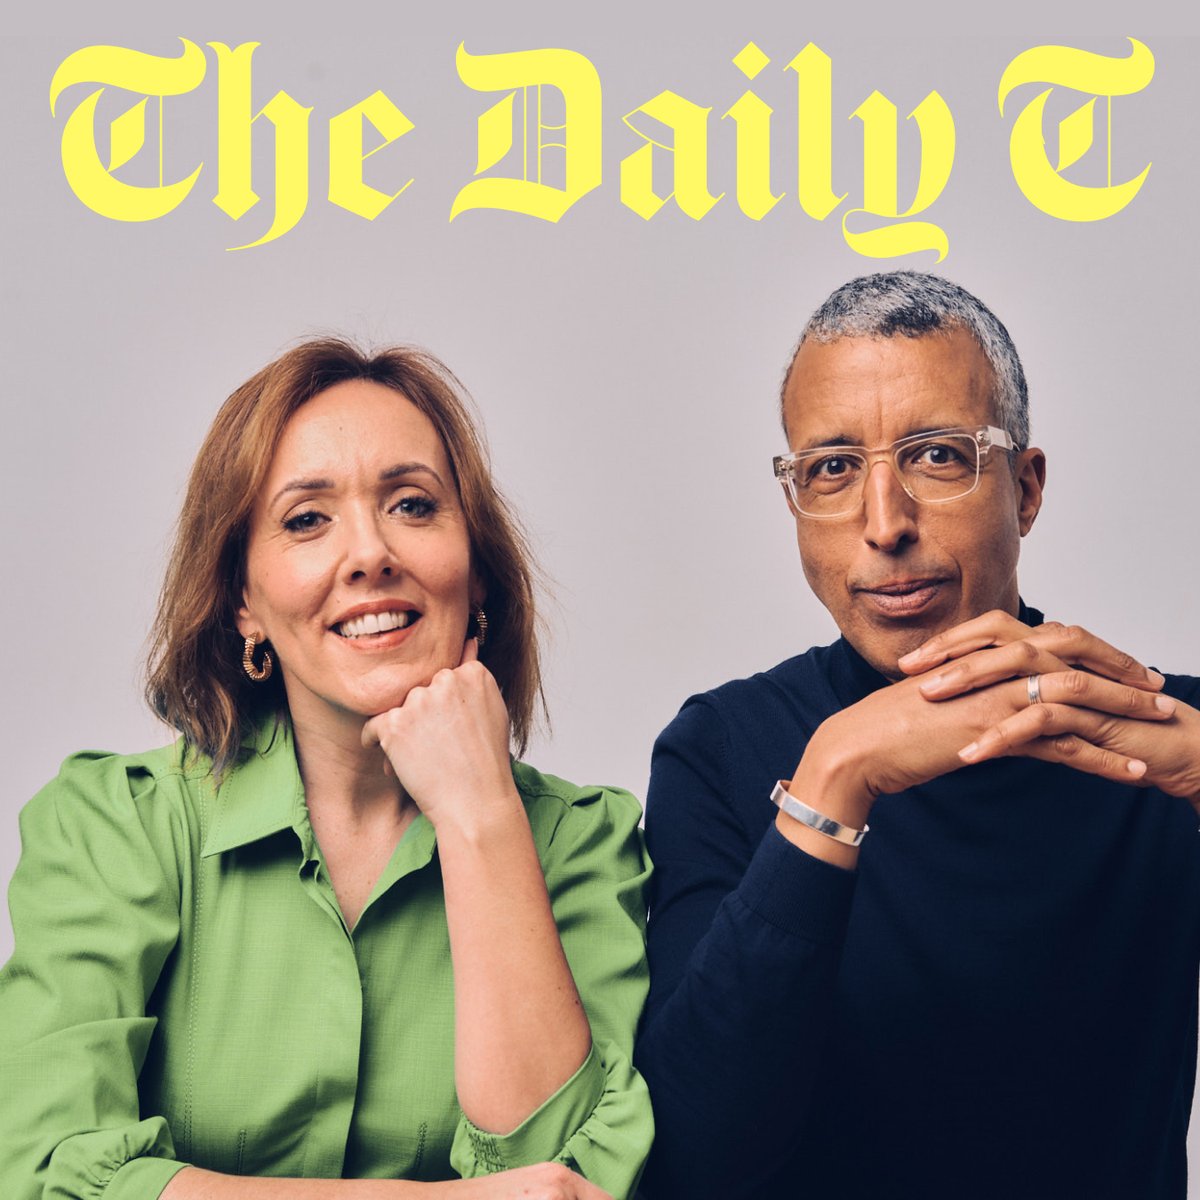 🚨 Work news! I'm going to be presenting a new daily podcast @Telegraph called the Daily T with the brilliant @kamalahmednews. Excited to be working with such a pro to deliver expert, credible and characterful audio content for listeners looking for a different perspective.…